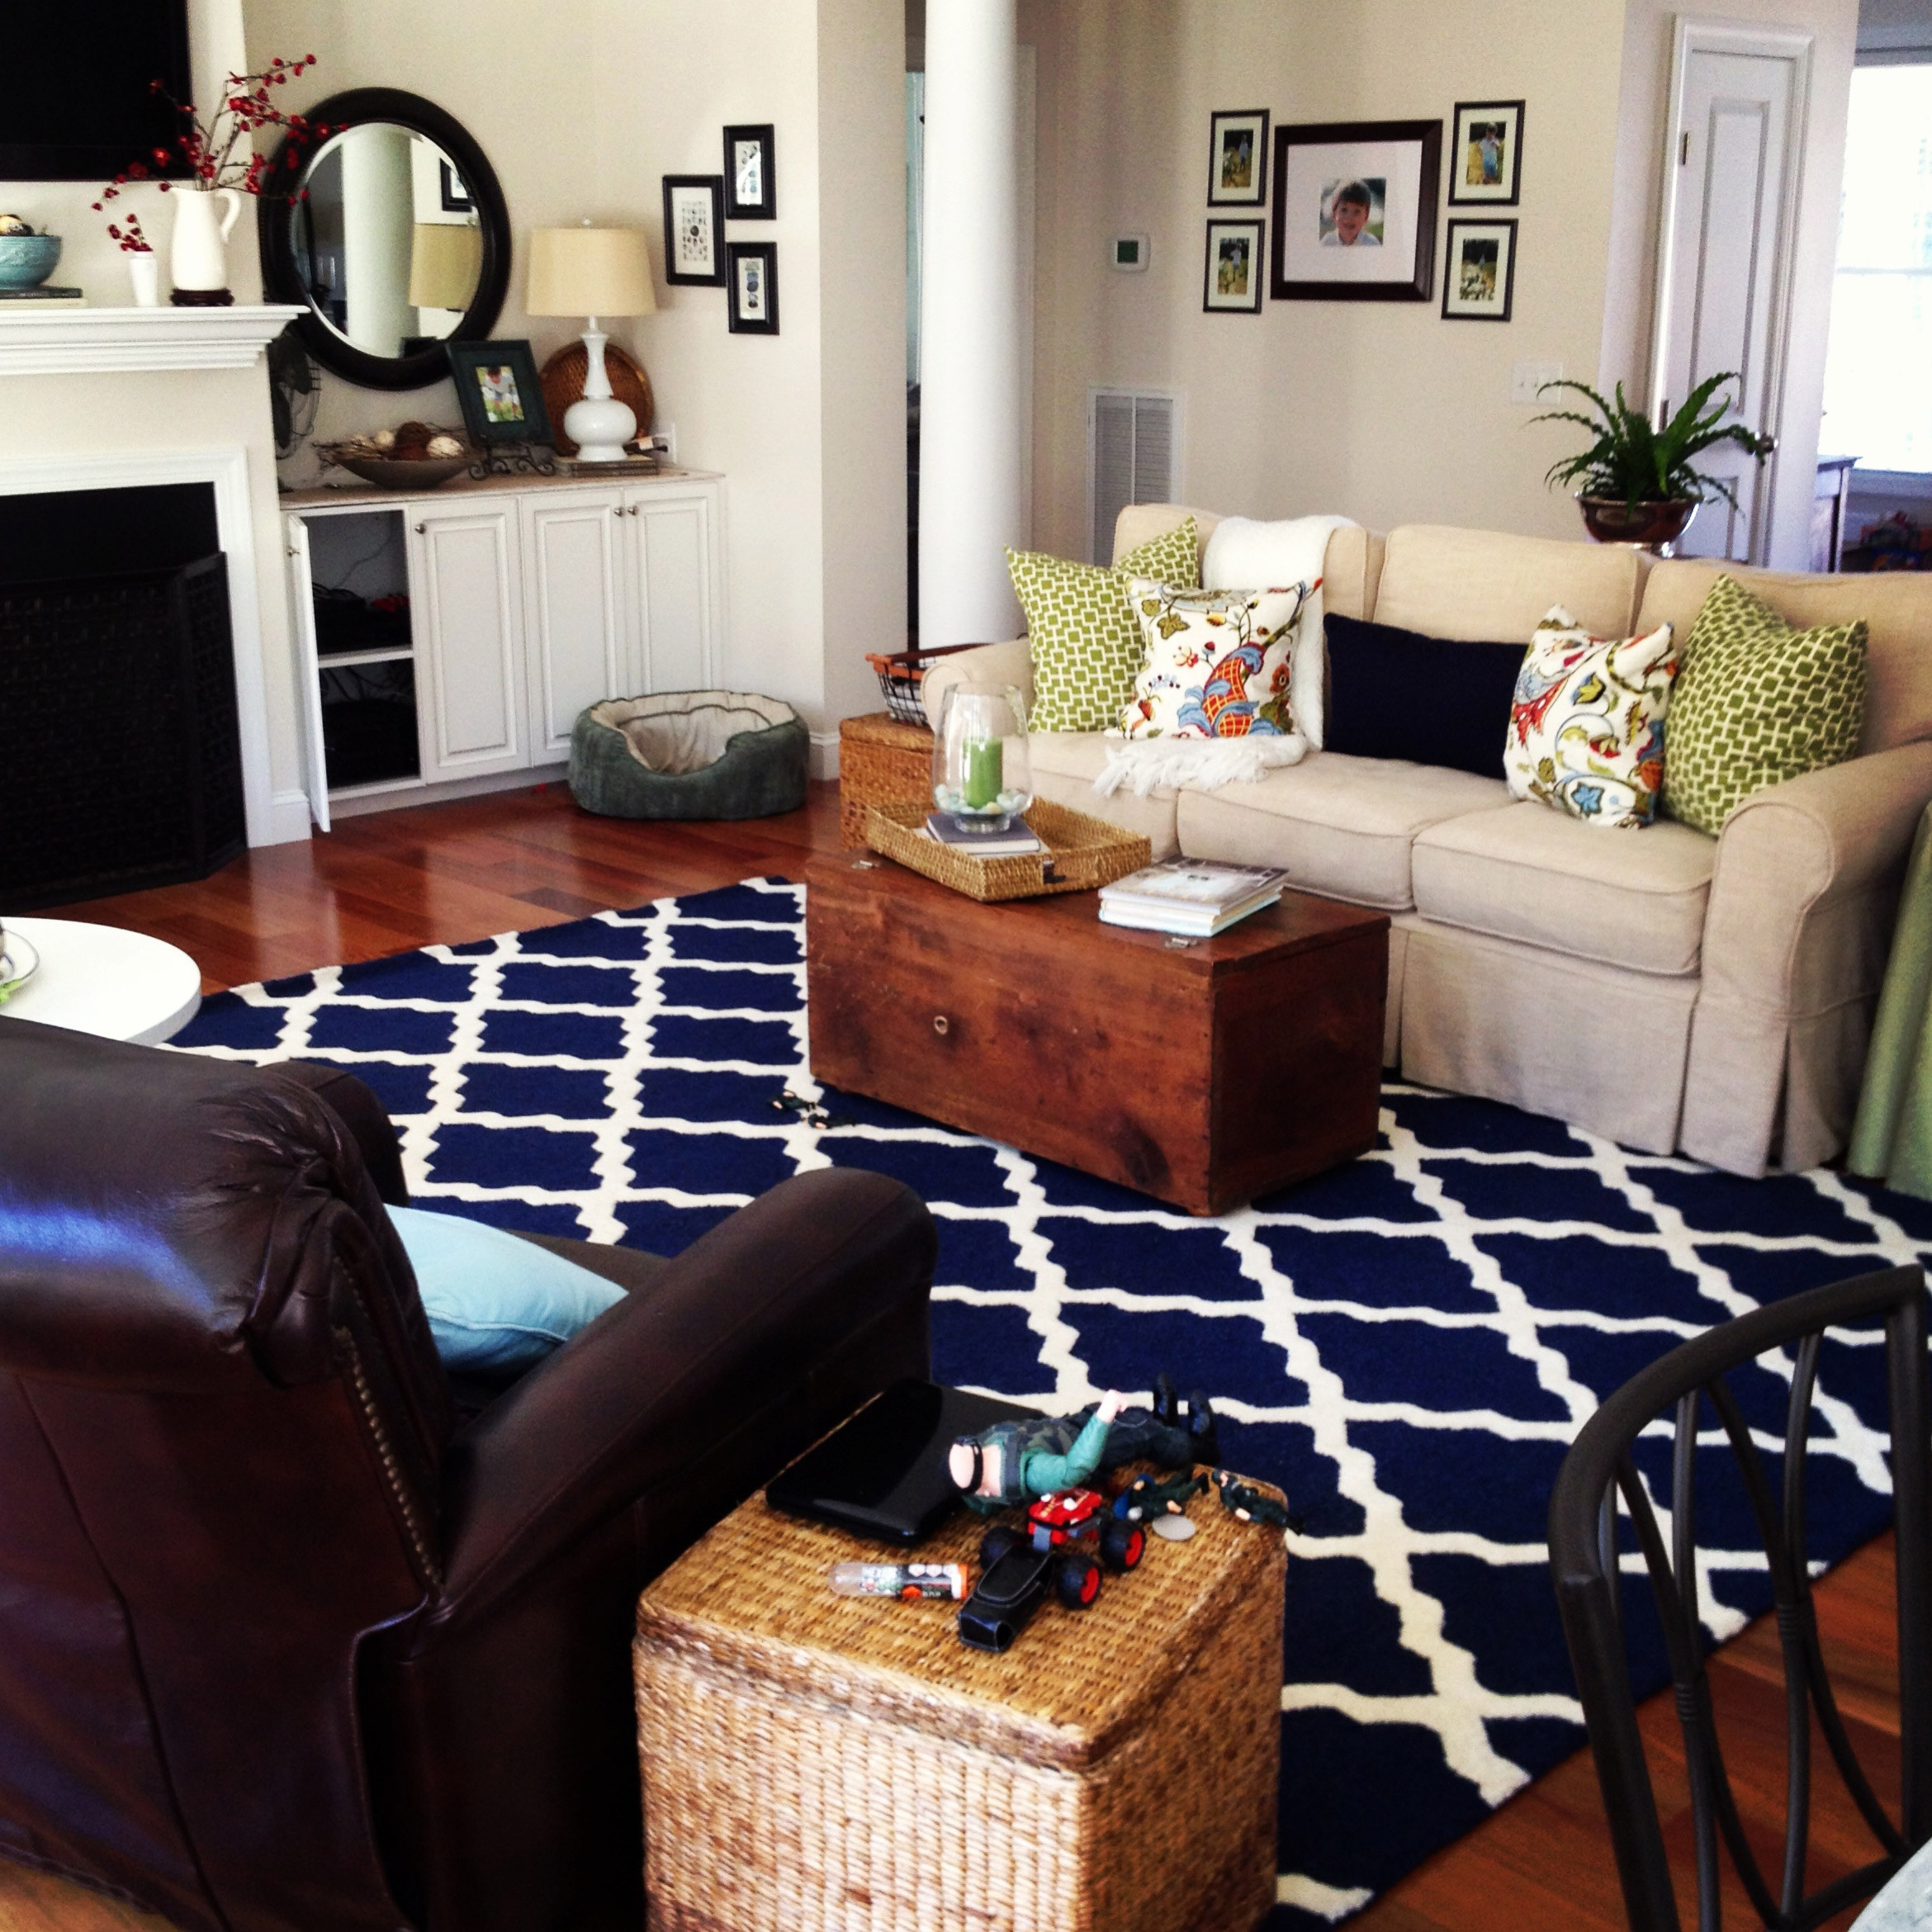 Living Room Rug Ideas
 Rugs for Cozy Living Room Area Rugs Ideas